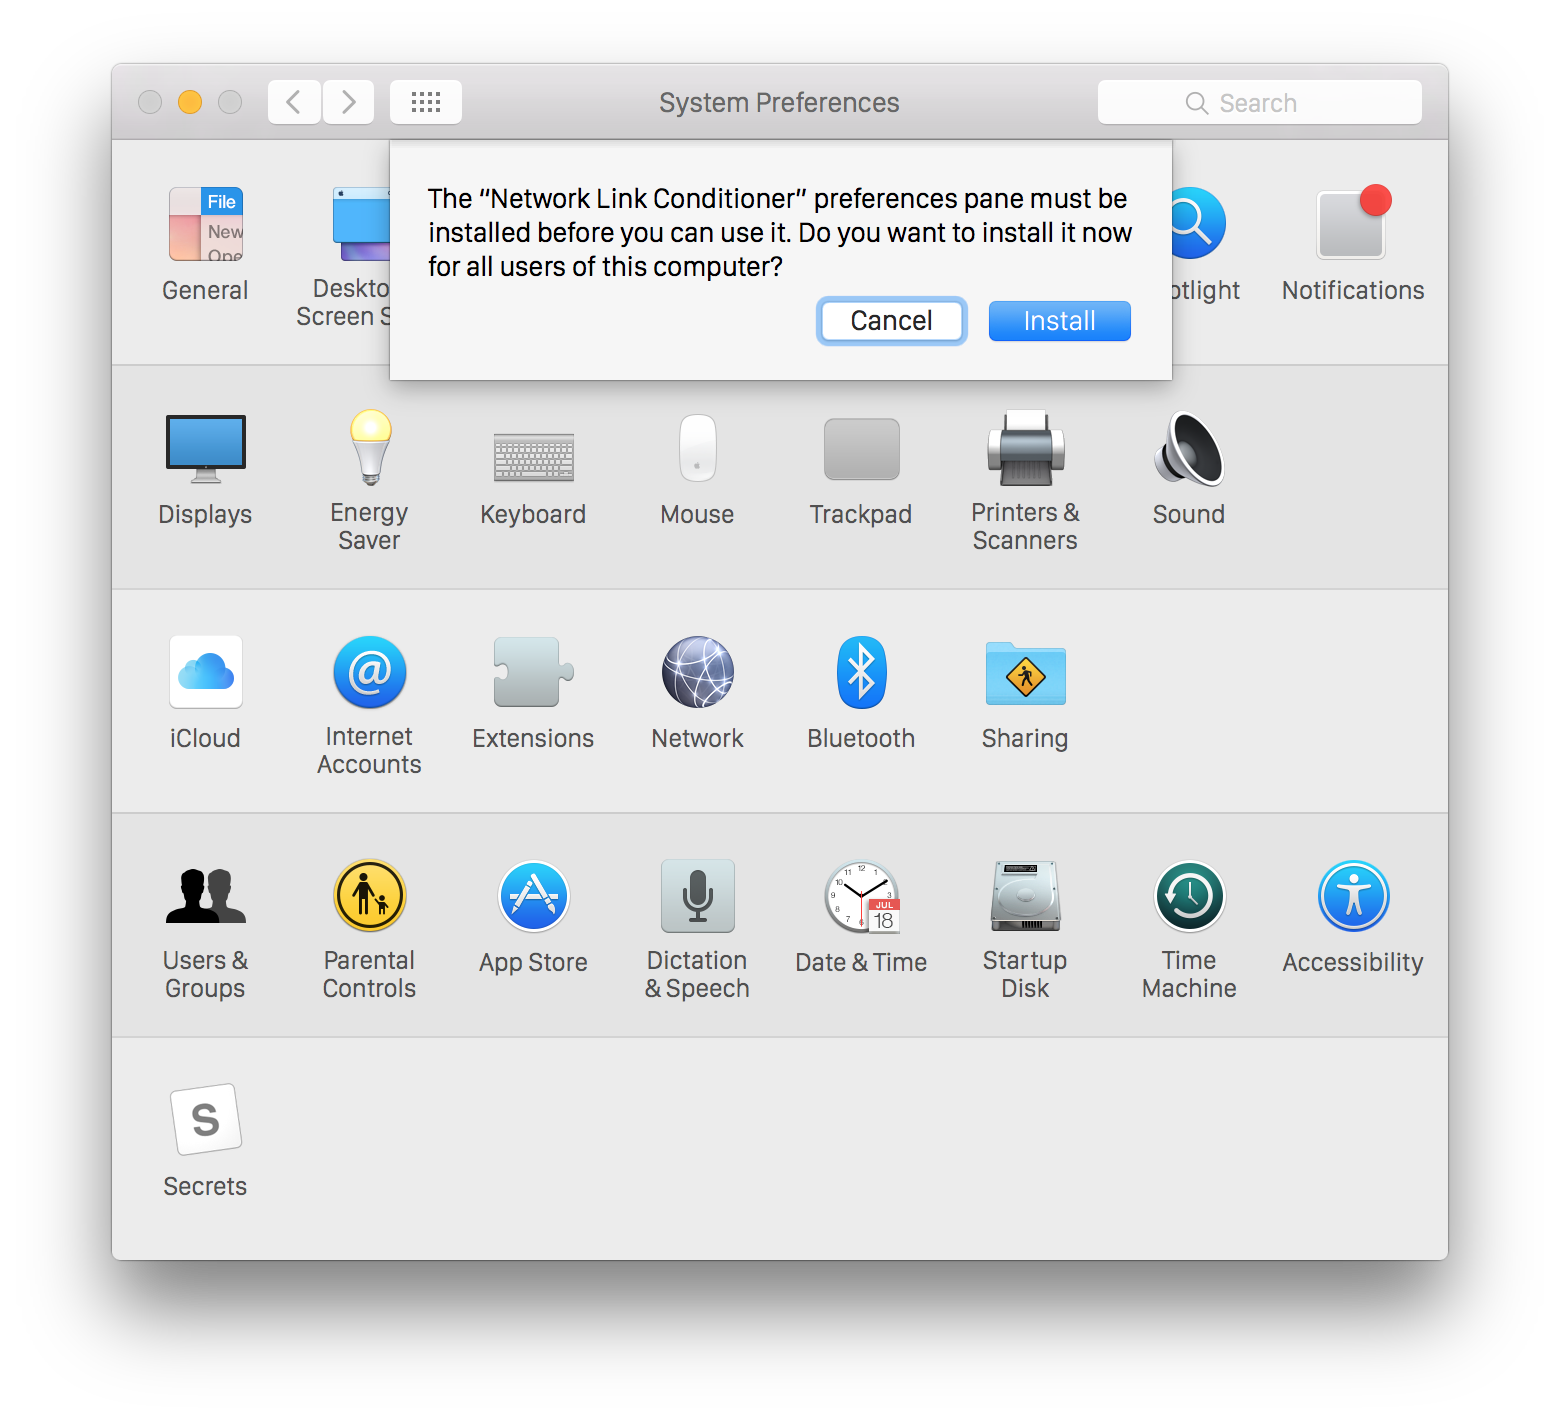 system preferences showing installation prompt